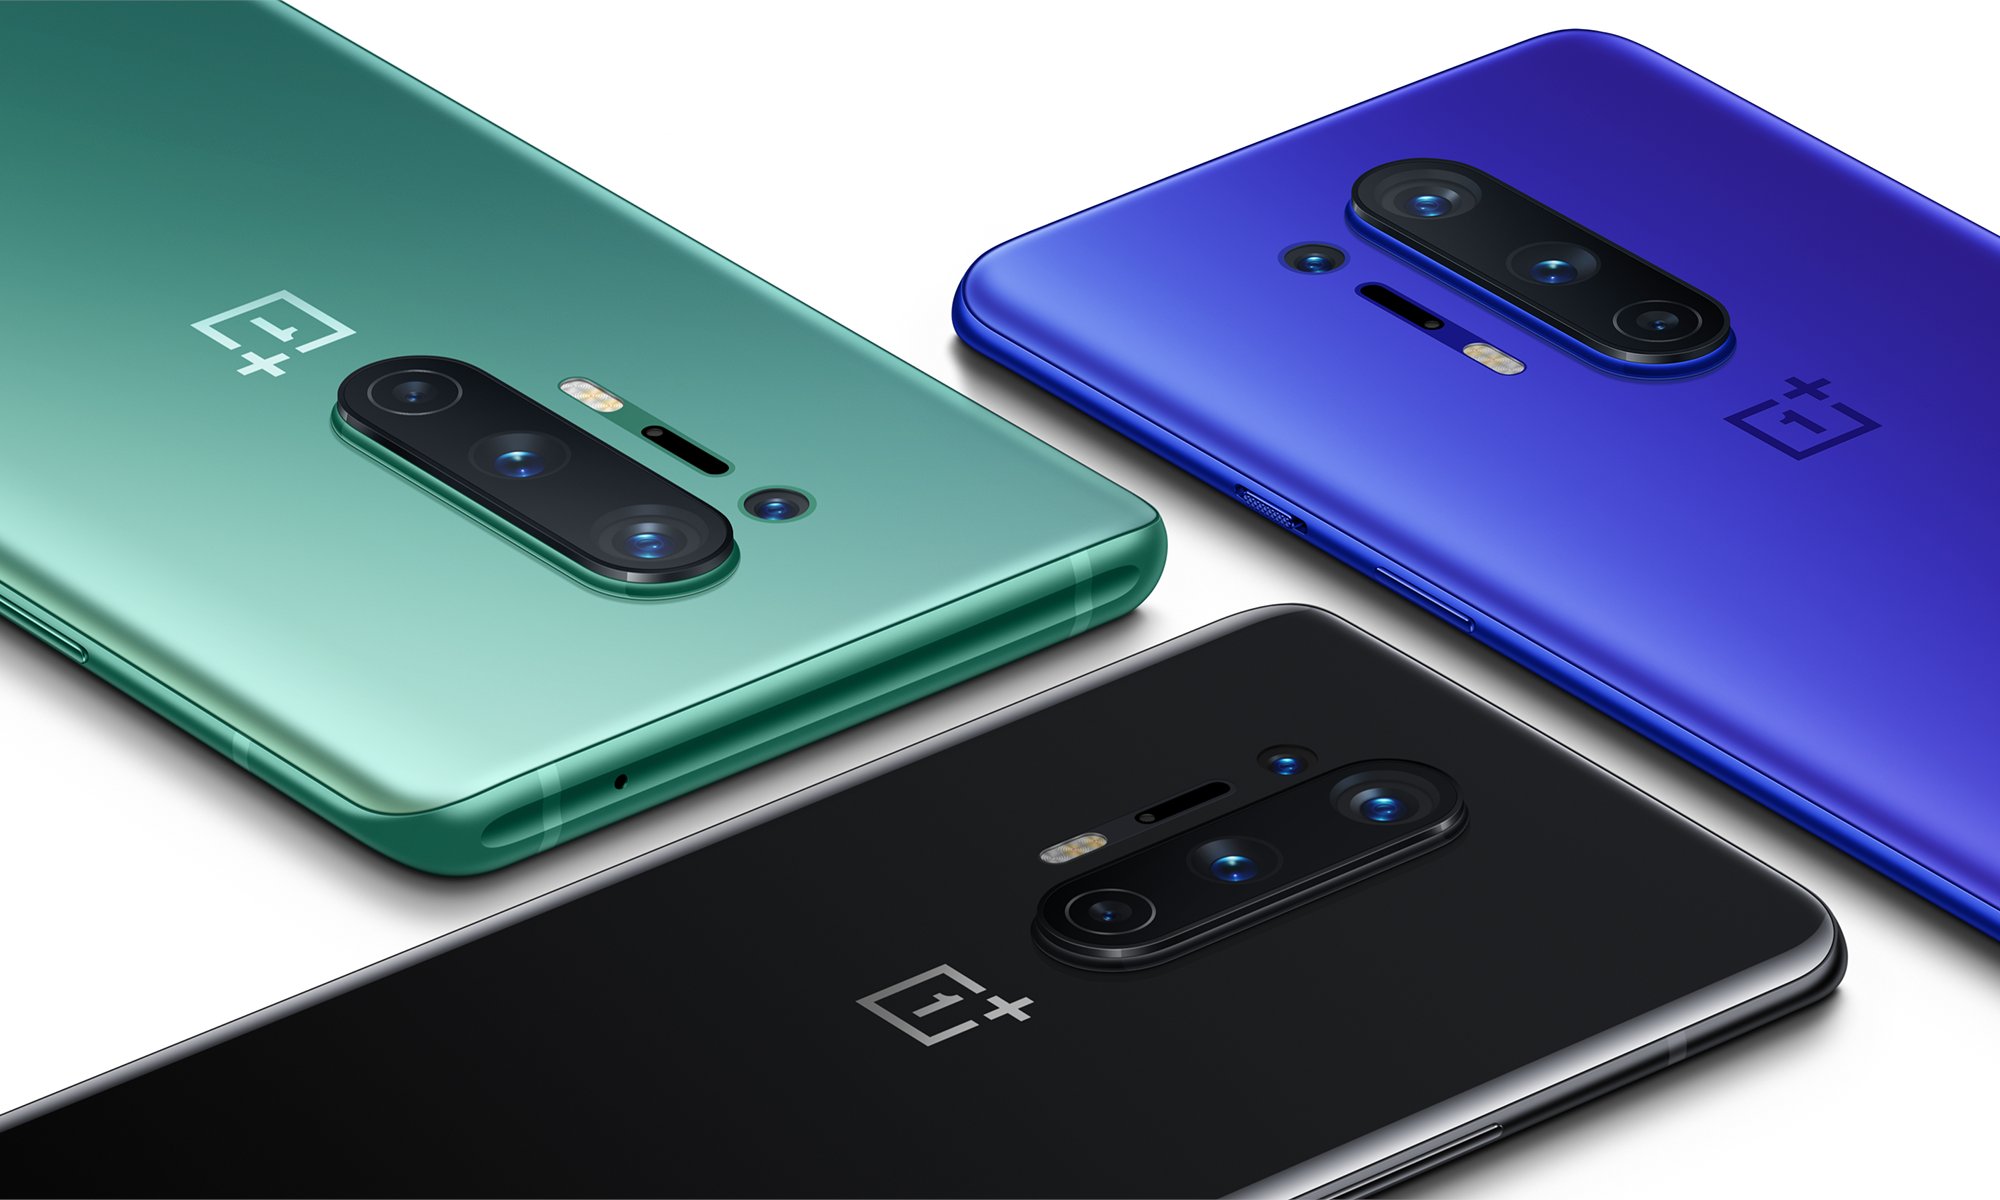 The OnePlus 8 Pro comes in three colors: Onyx Black, Glacial Green and Ultramarine Blue. (Picture: OnePlus)